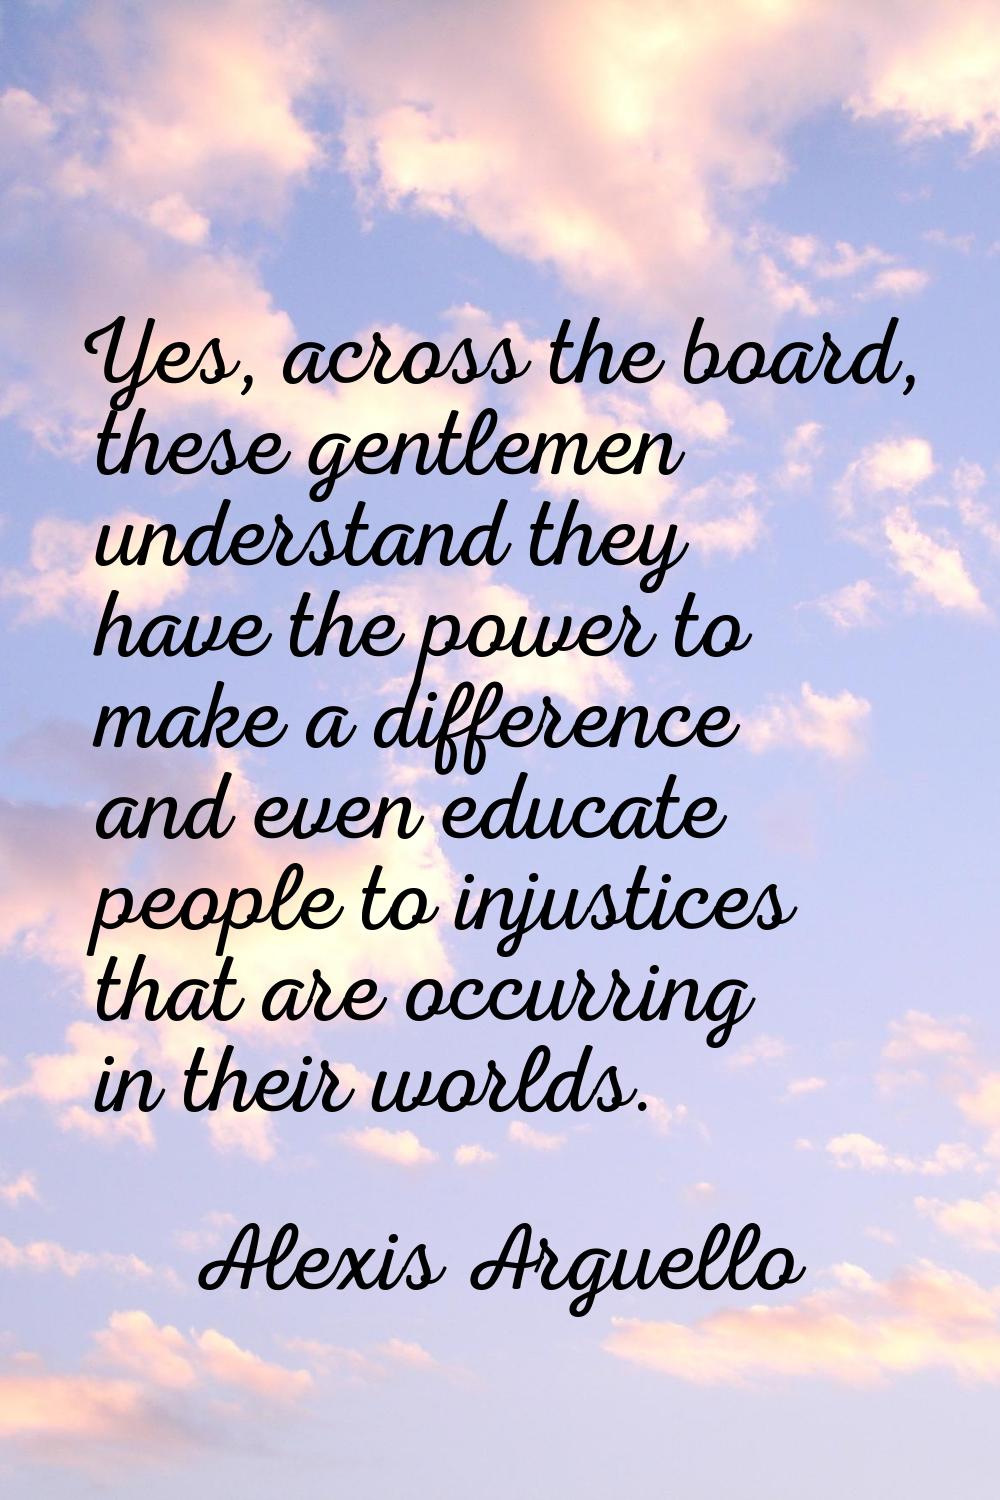 Yes, across the board, these gentlemen understand they have the power to make a difference and even